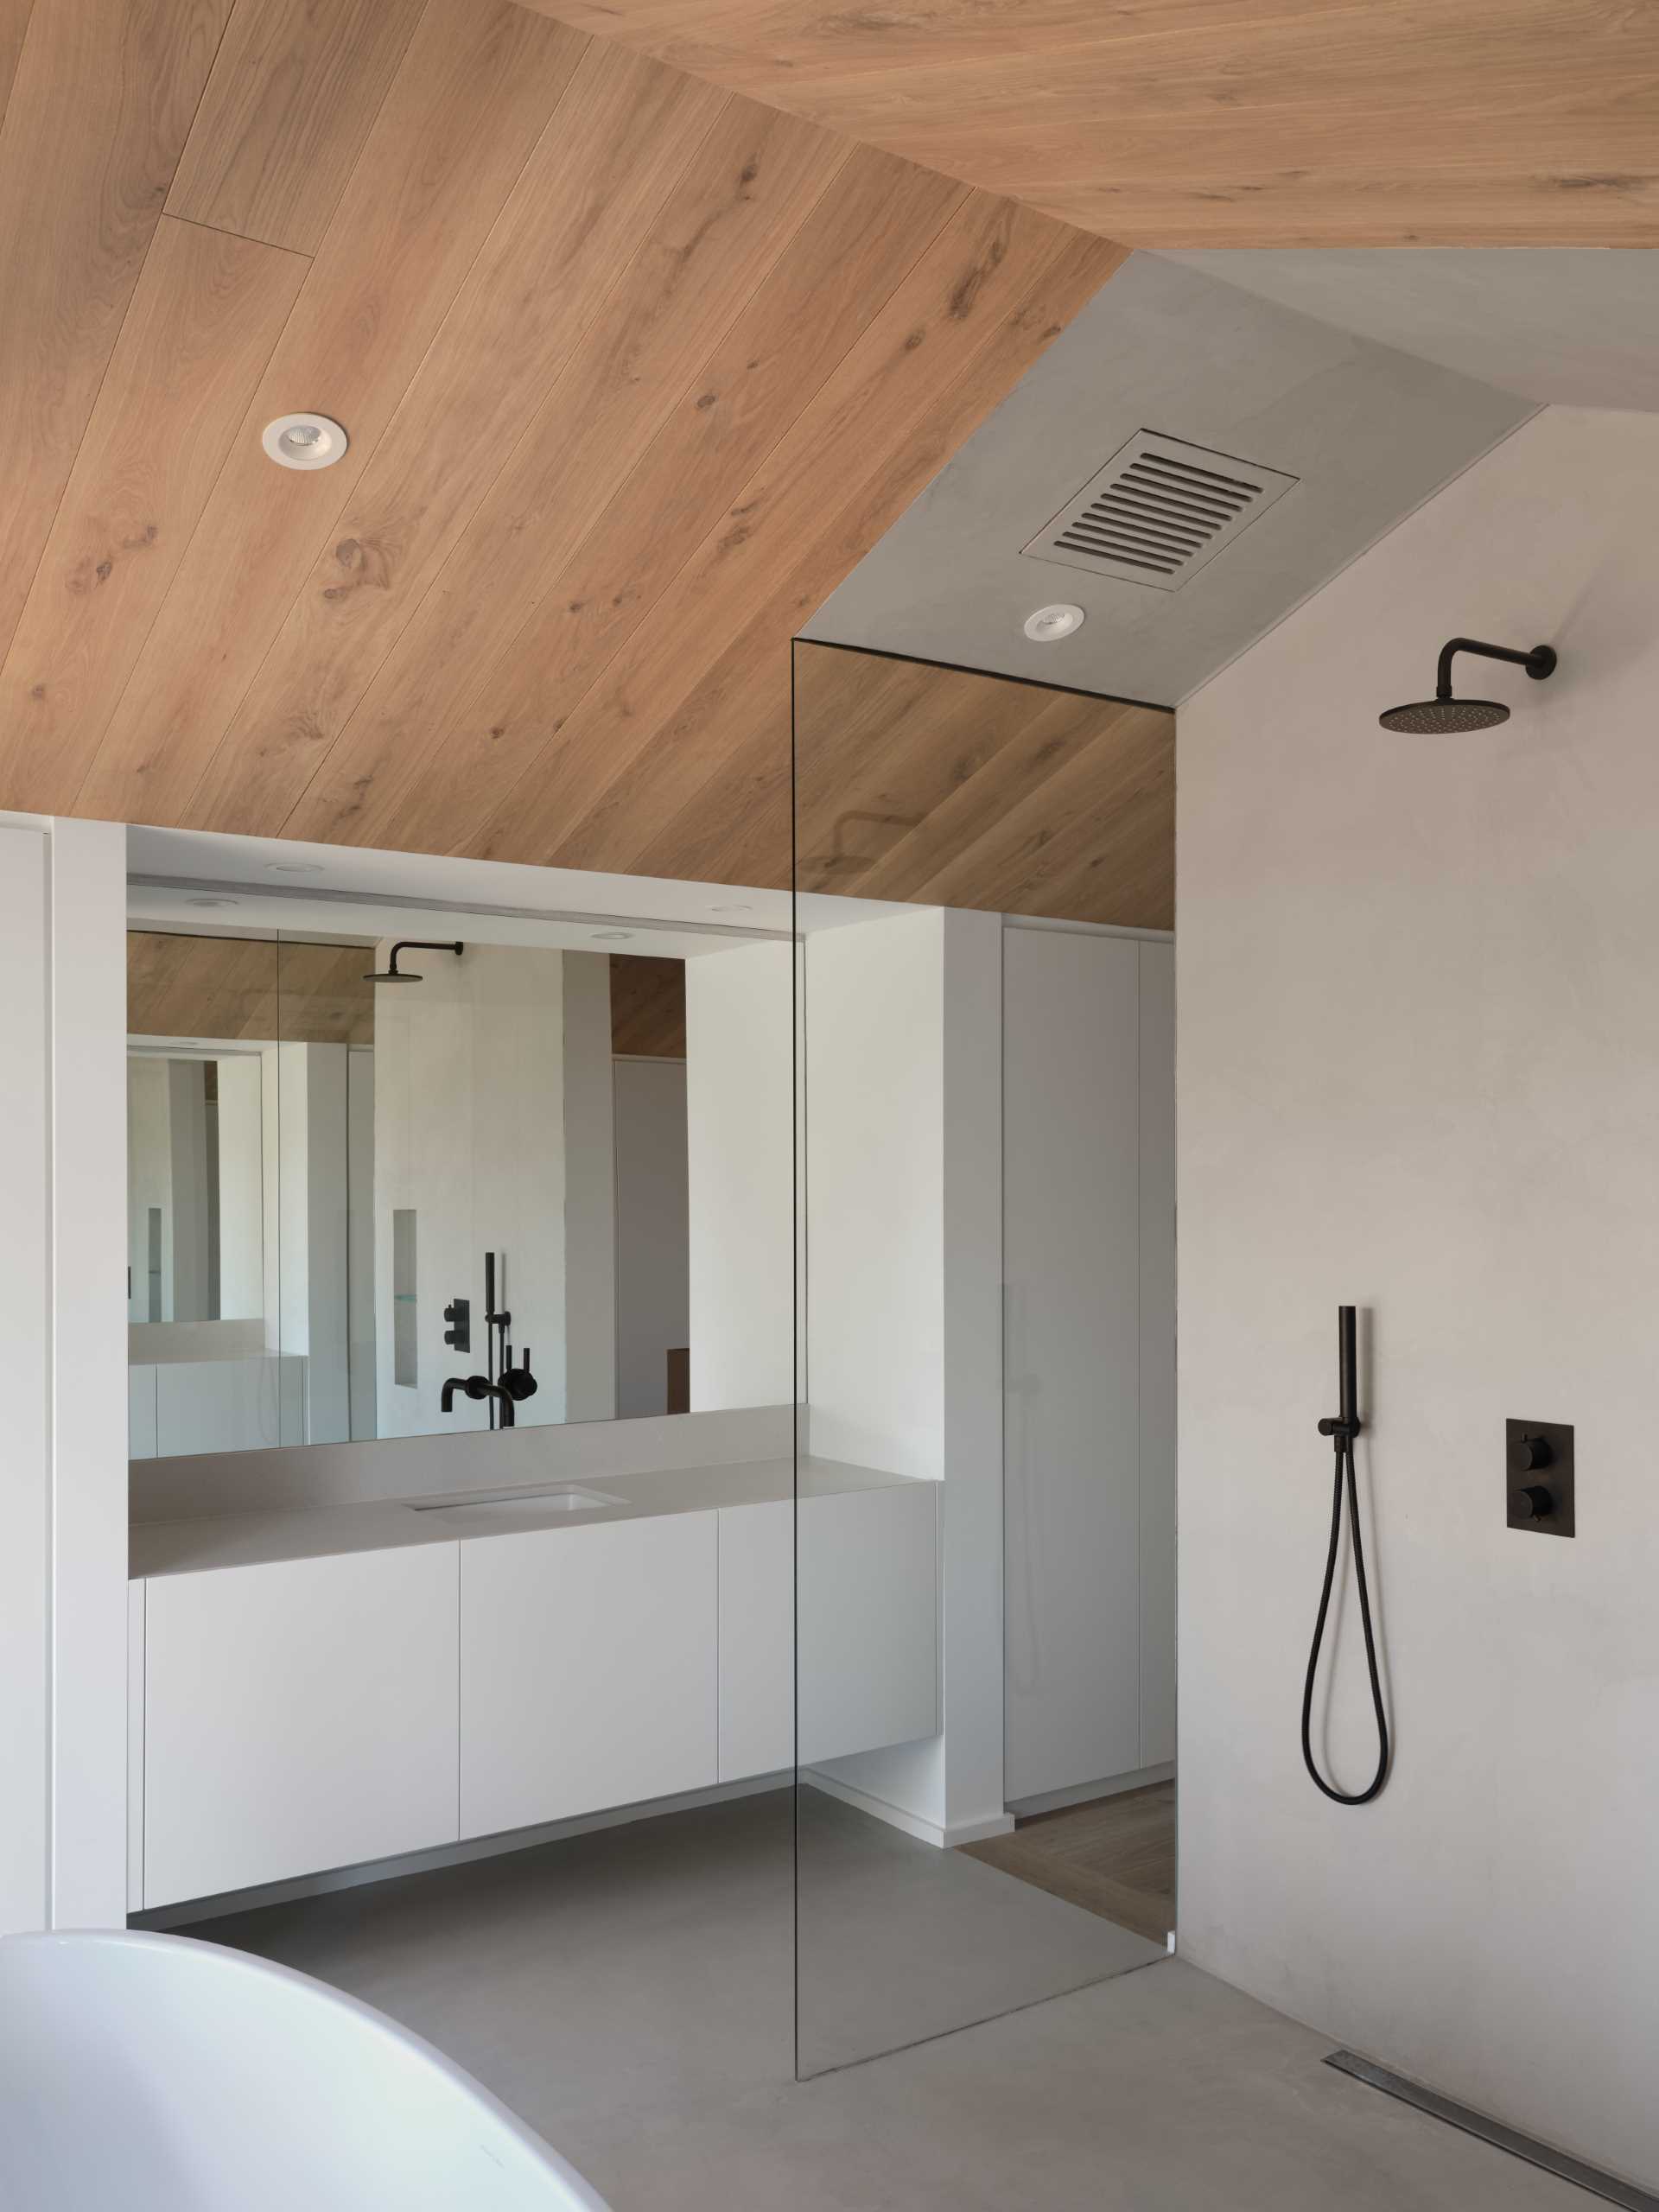 This primary bathroom has a walk-in s،wer and a large vanity with cabinetry on either side, while a freestanding bathtub is positioned by the window that looks out to a private deck.